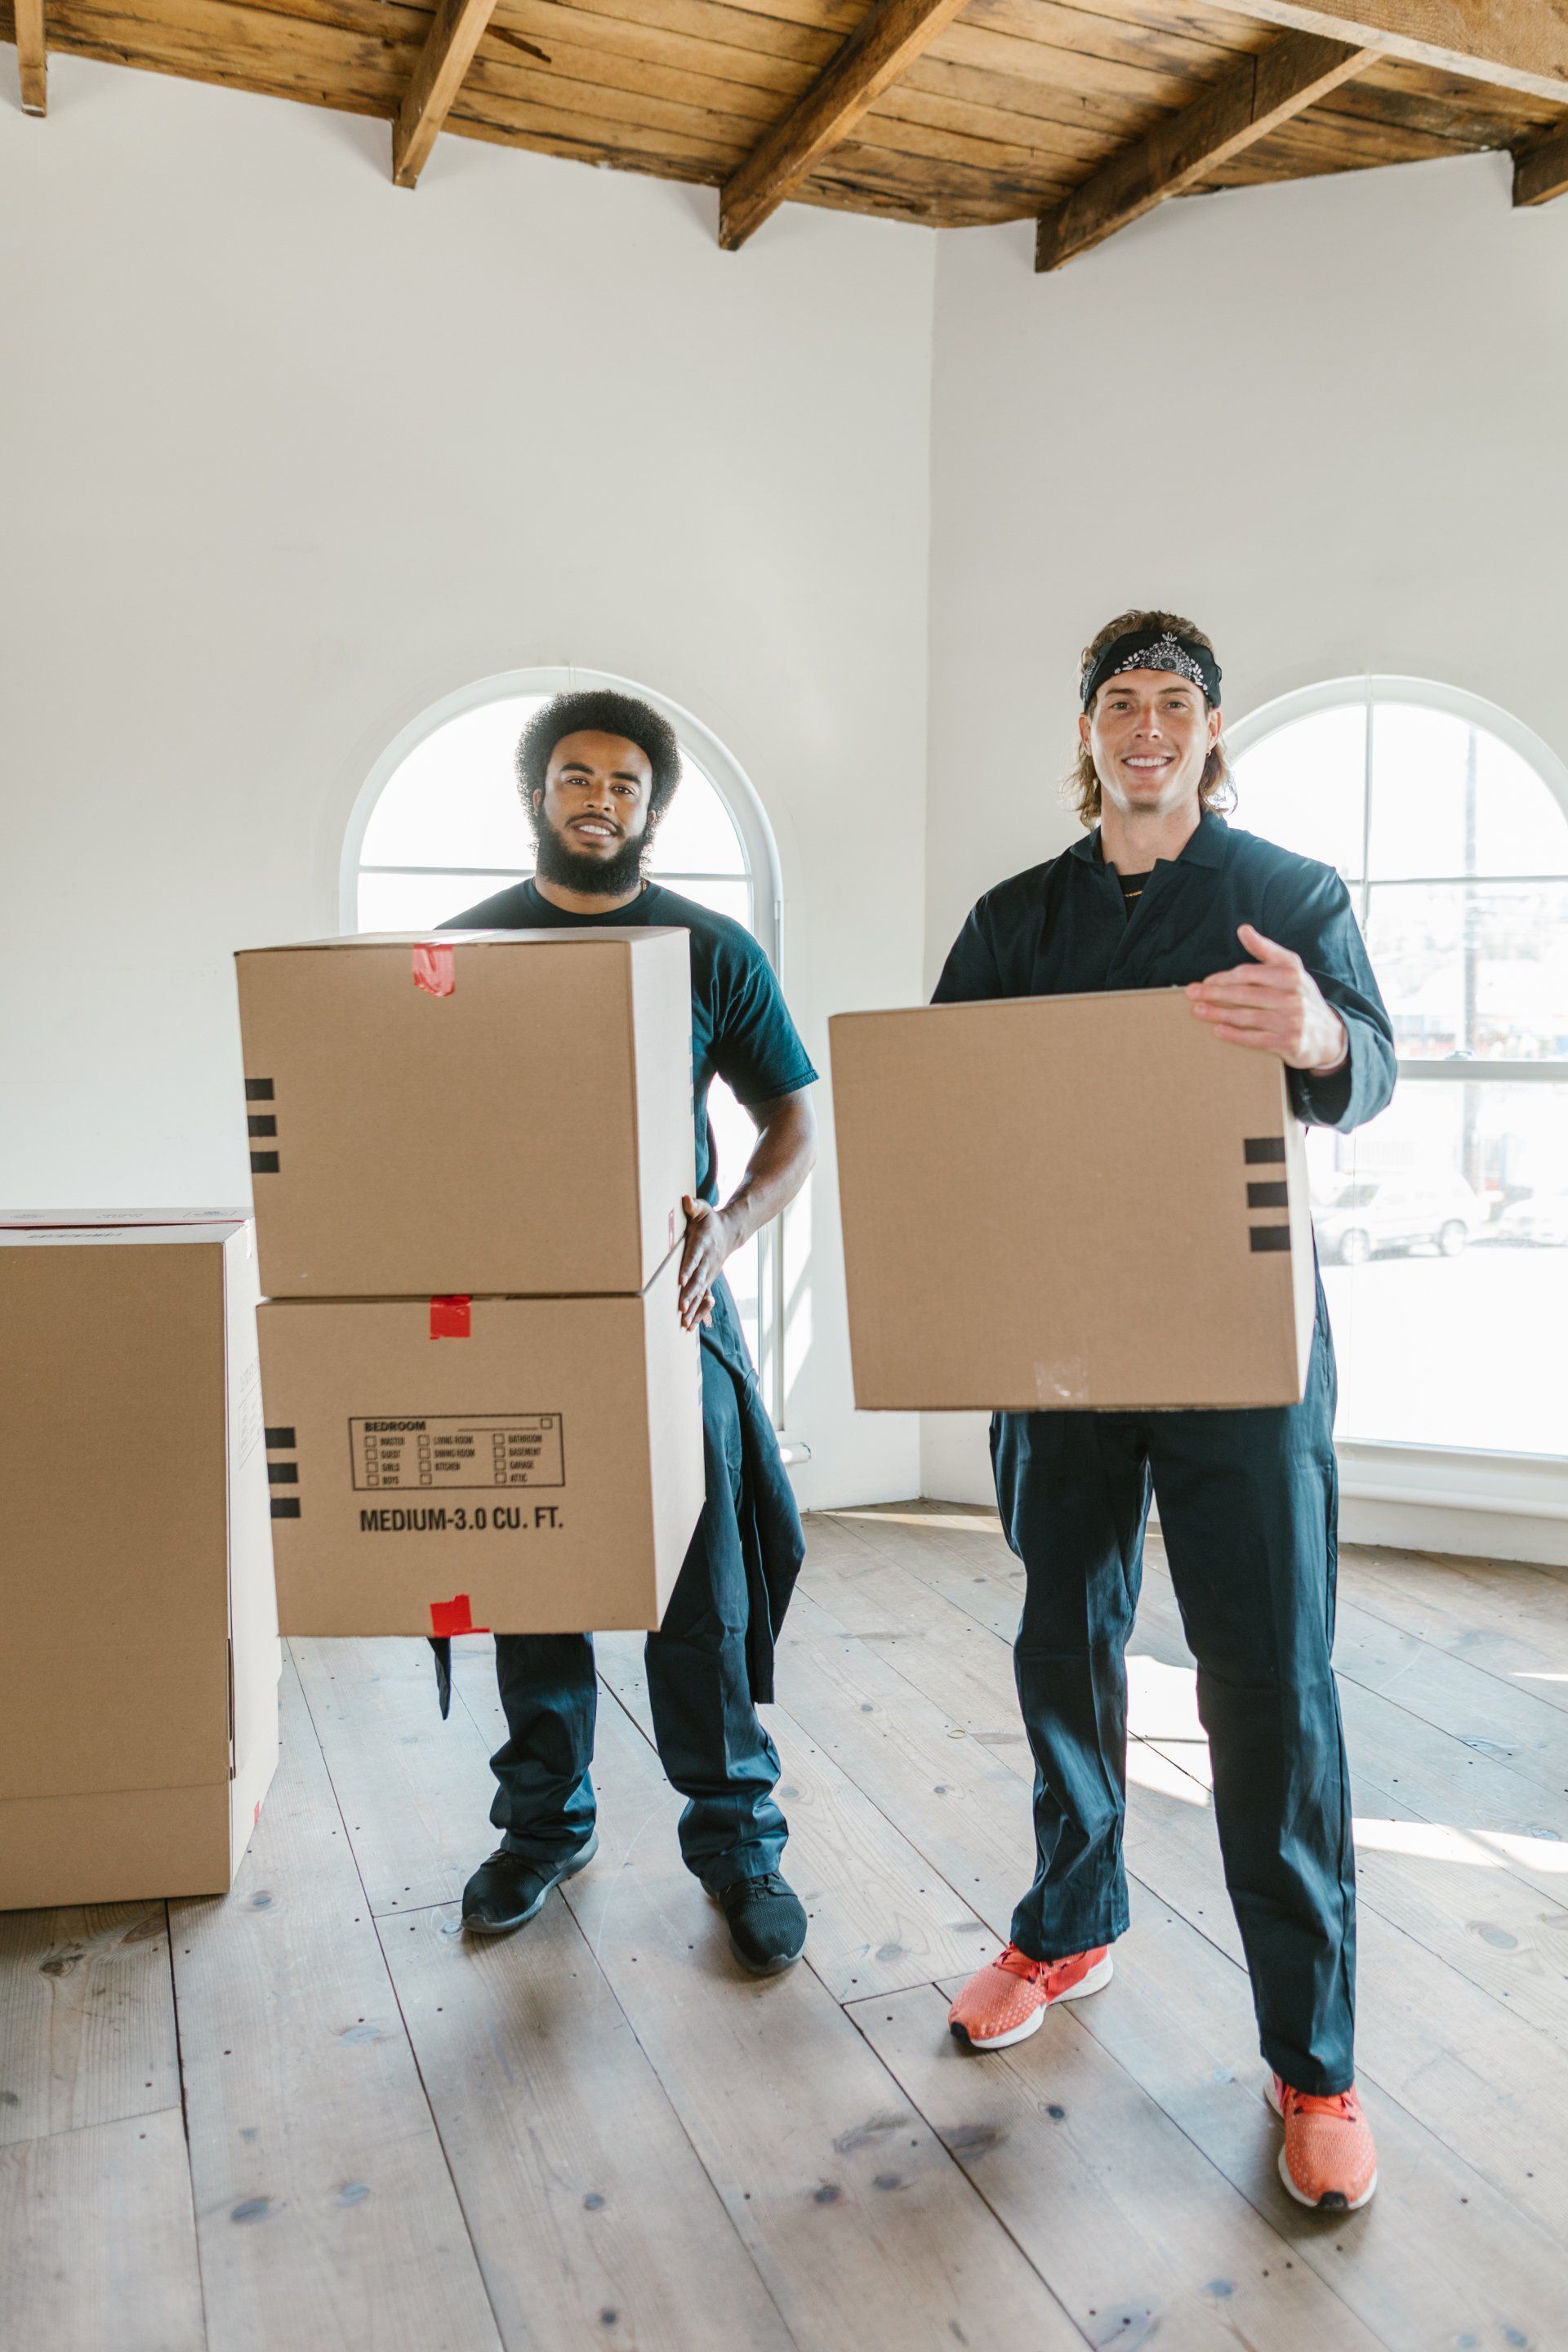 Two men are carrying cardboard boxes in an empty room.